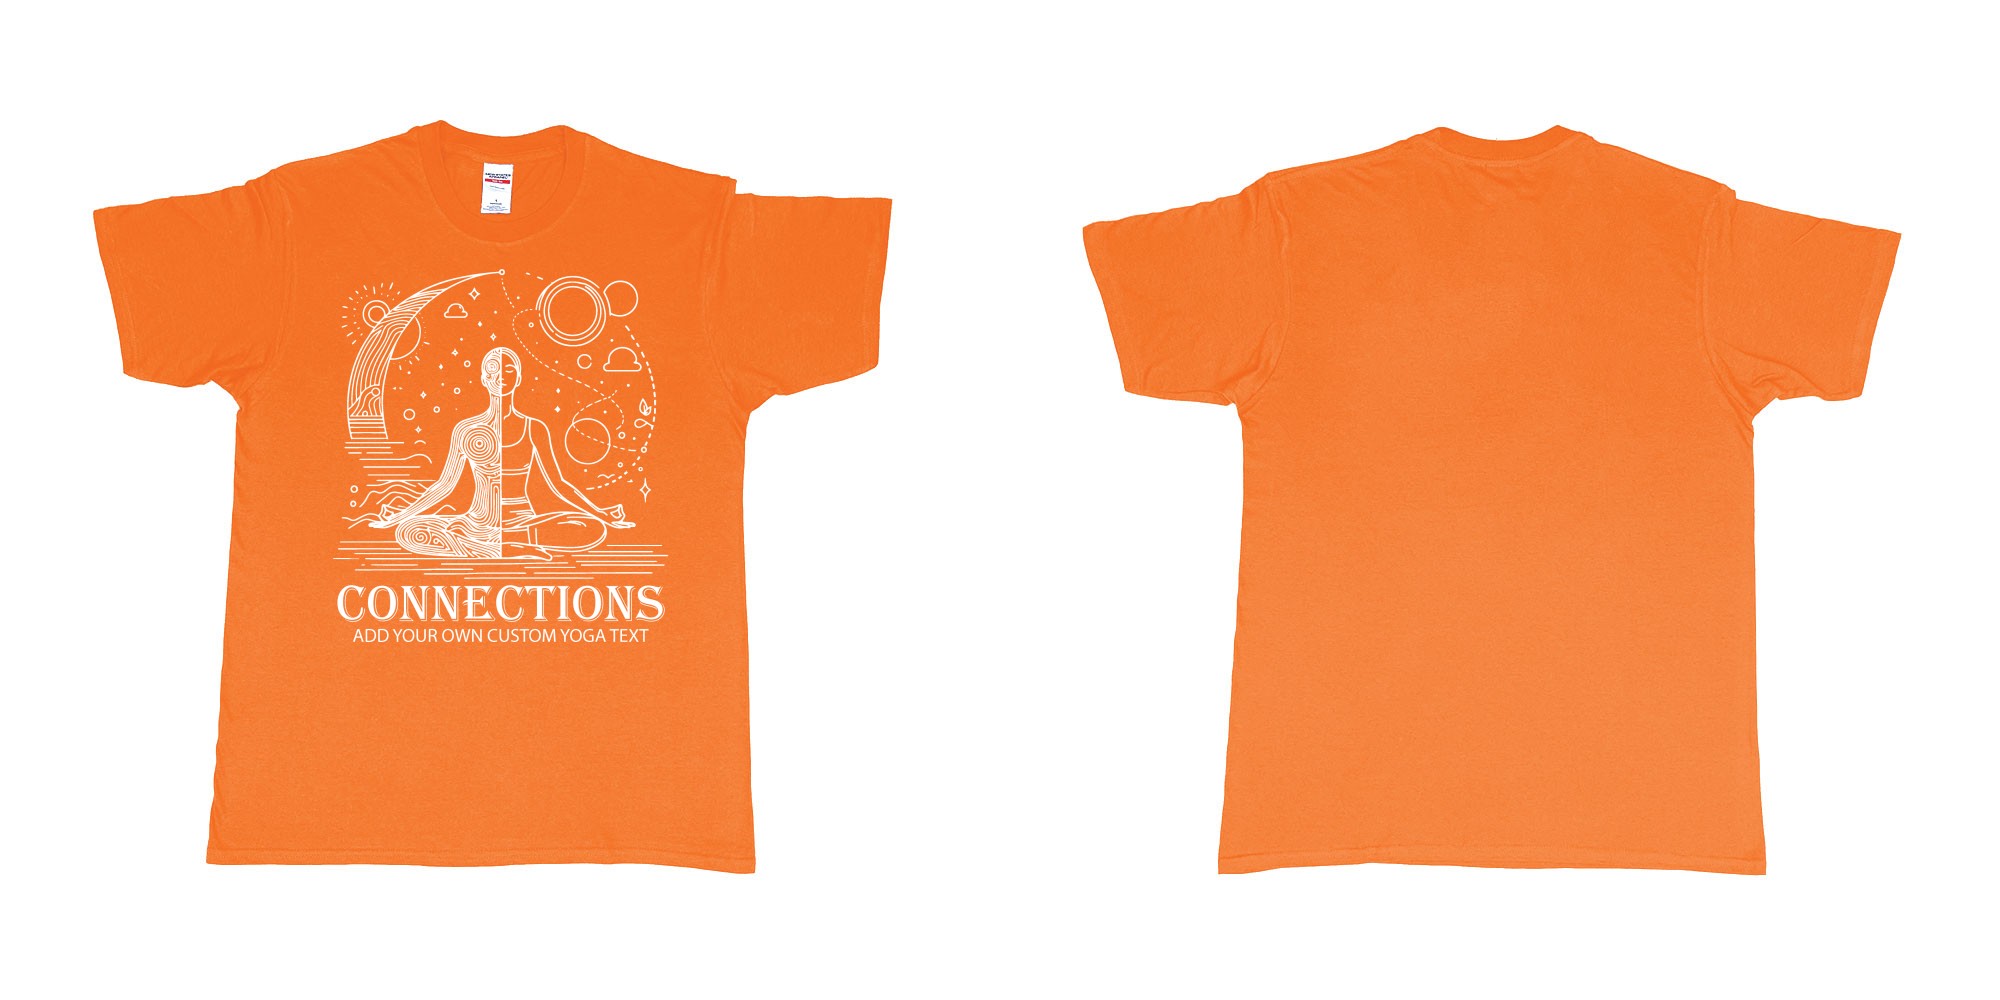 Custom tshirt design yogo connections human moon stars custom bali tshirt printing in fabric color orange choice your own text made in Bali by The Pirate Way